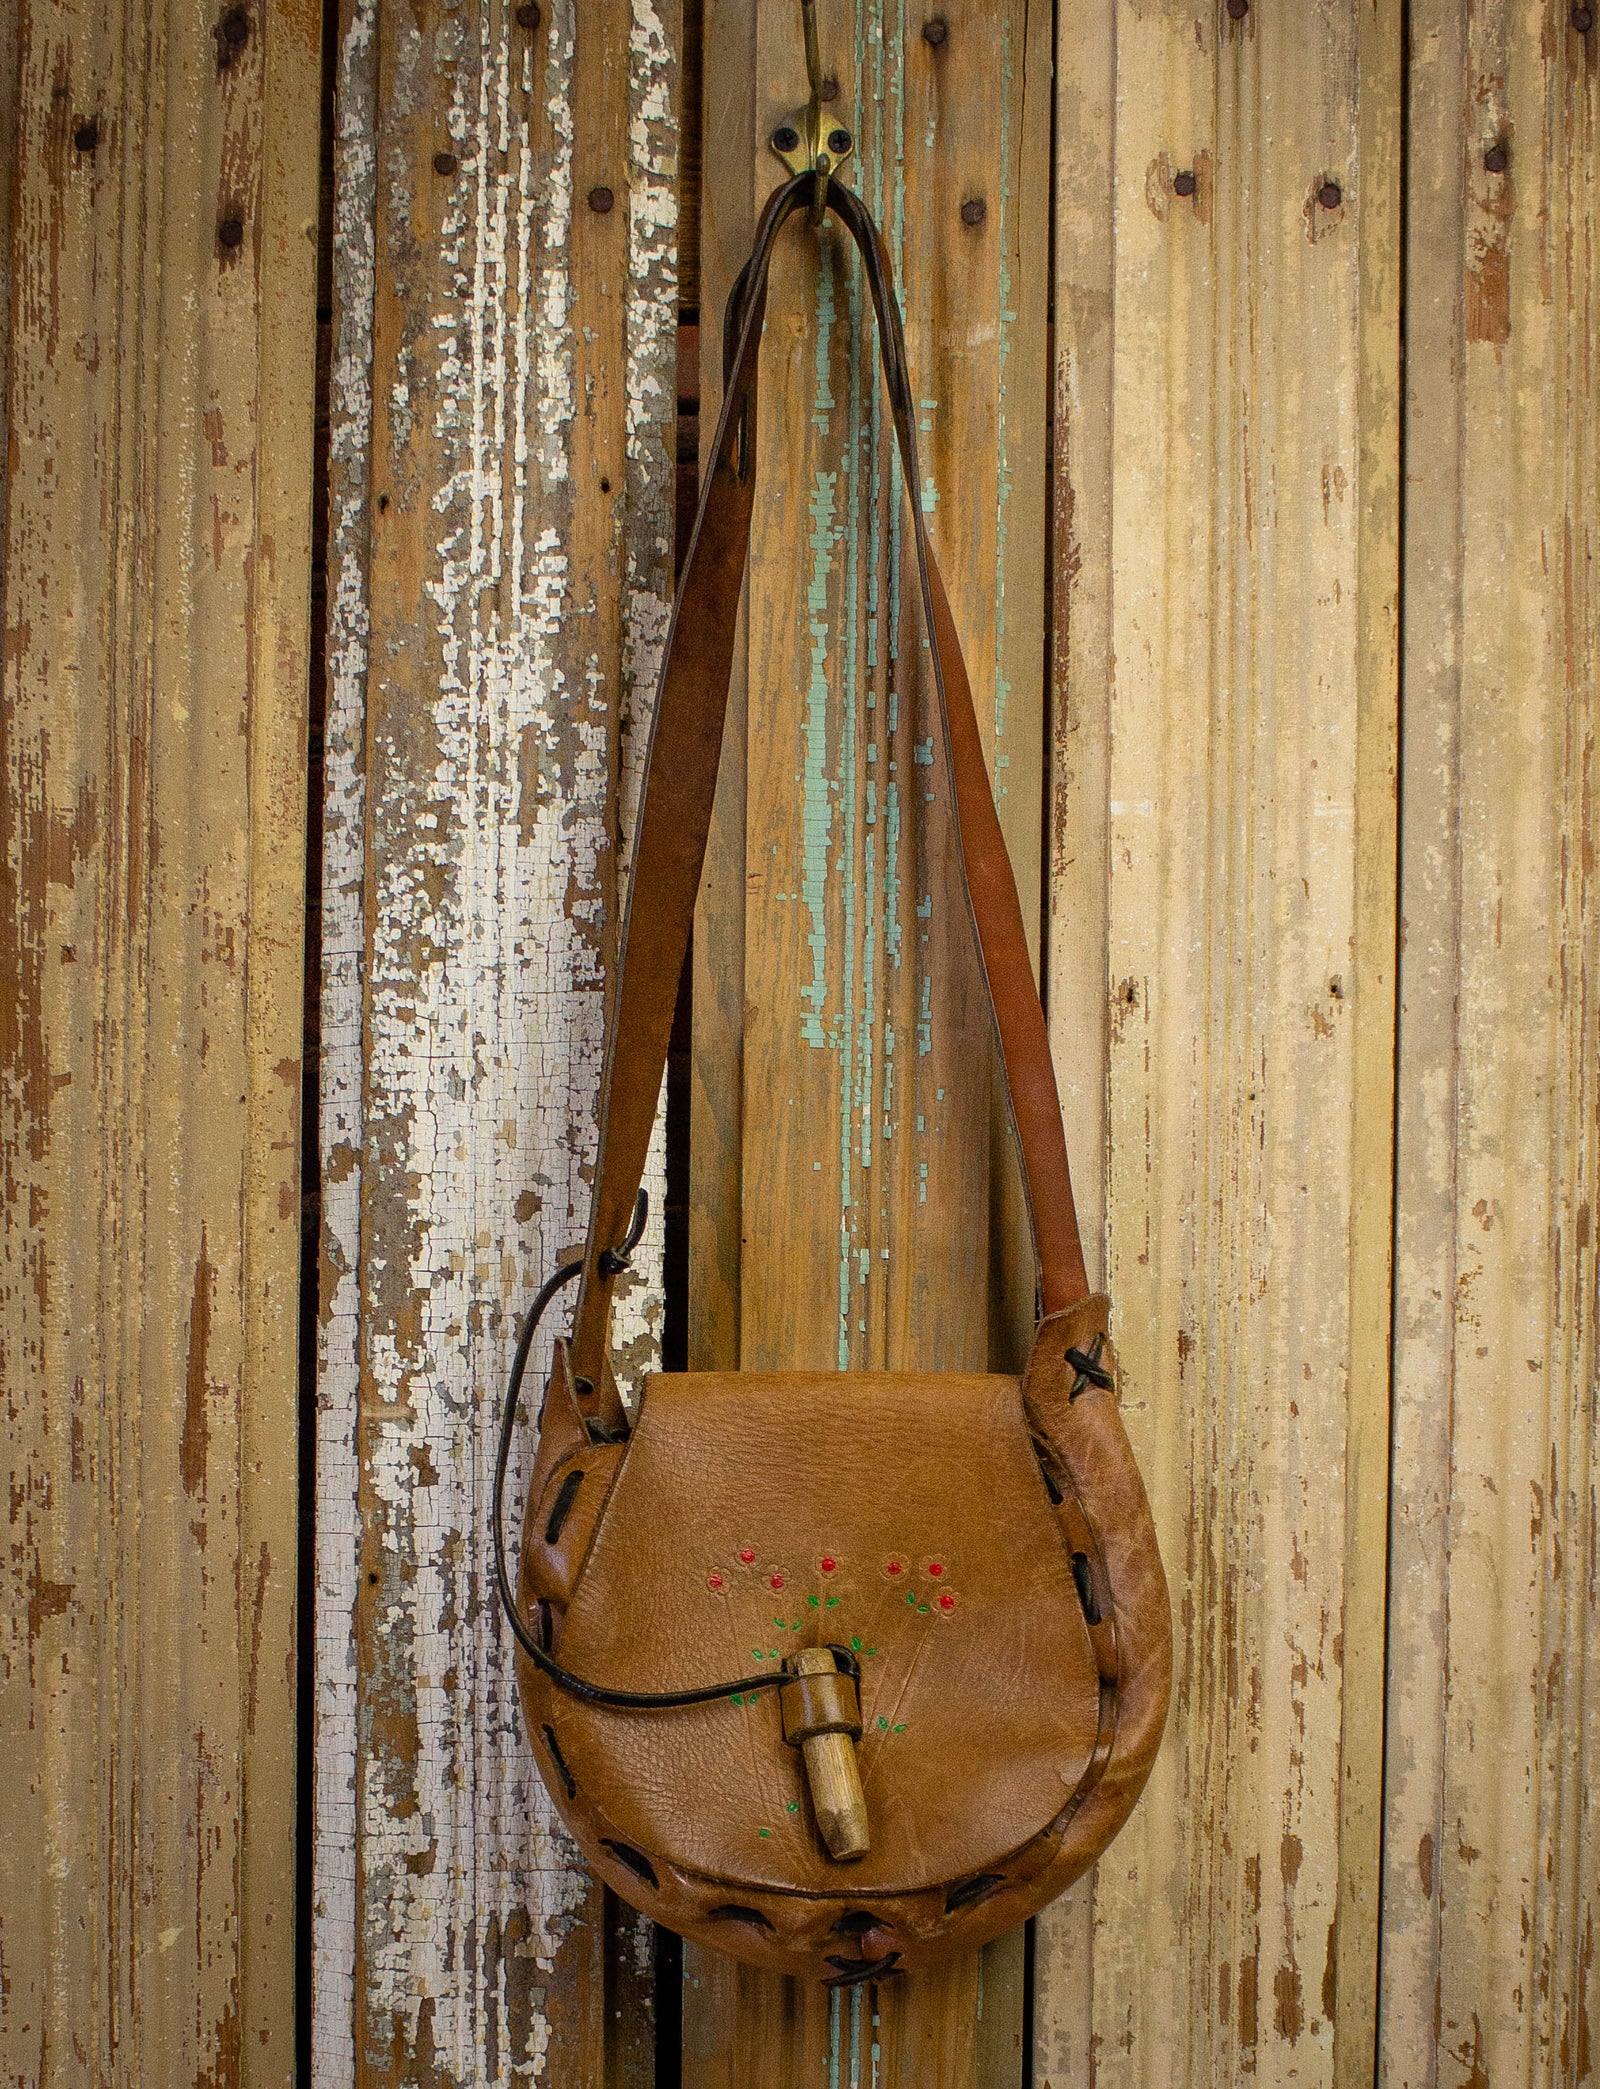 vintage style Leather Saddle Bag with a Pocket for Women handmade